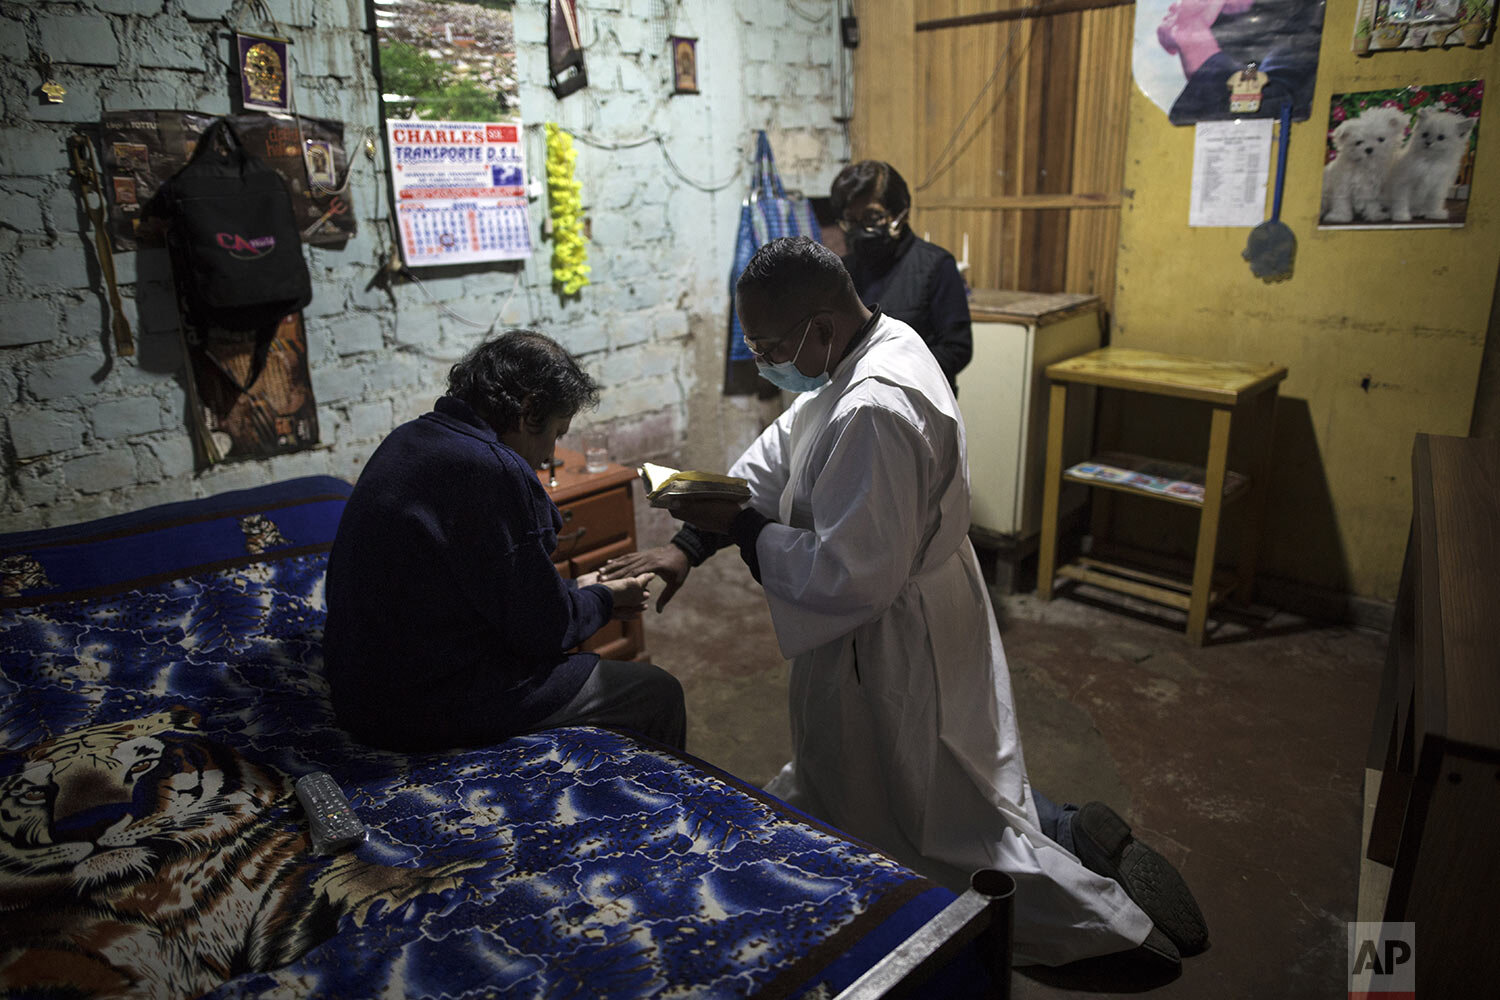  Brother Ronald Marin prays with Jose Munoz who suffers from osteoarthritis, in Comas, on the outskirts of Lima, Peru, Thursday, July 23, 2020. (AP Photo/Rodrigo Abd) 